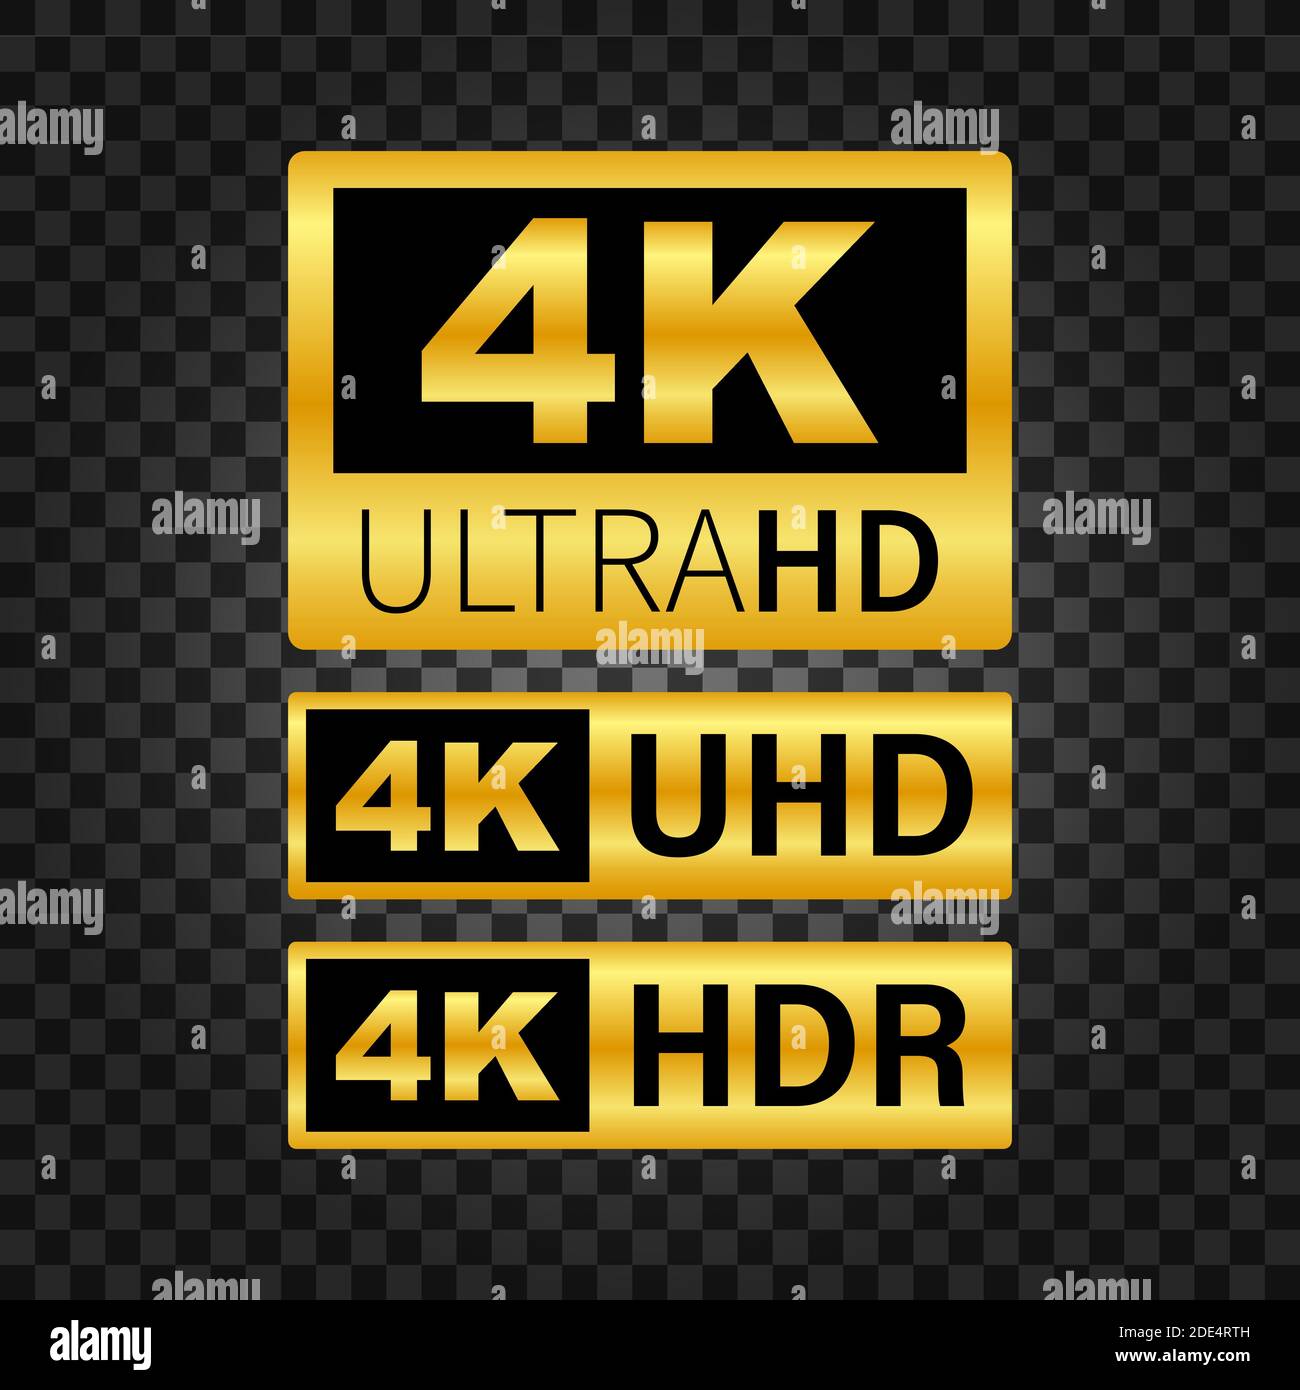 4K Ultra HD label. High technology. LED television display. Vector illustration. Stock Vector